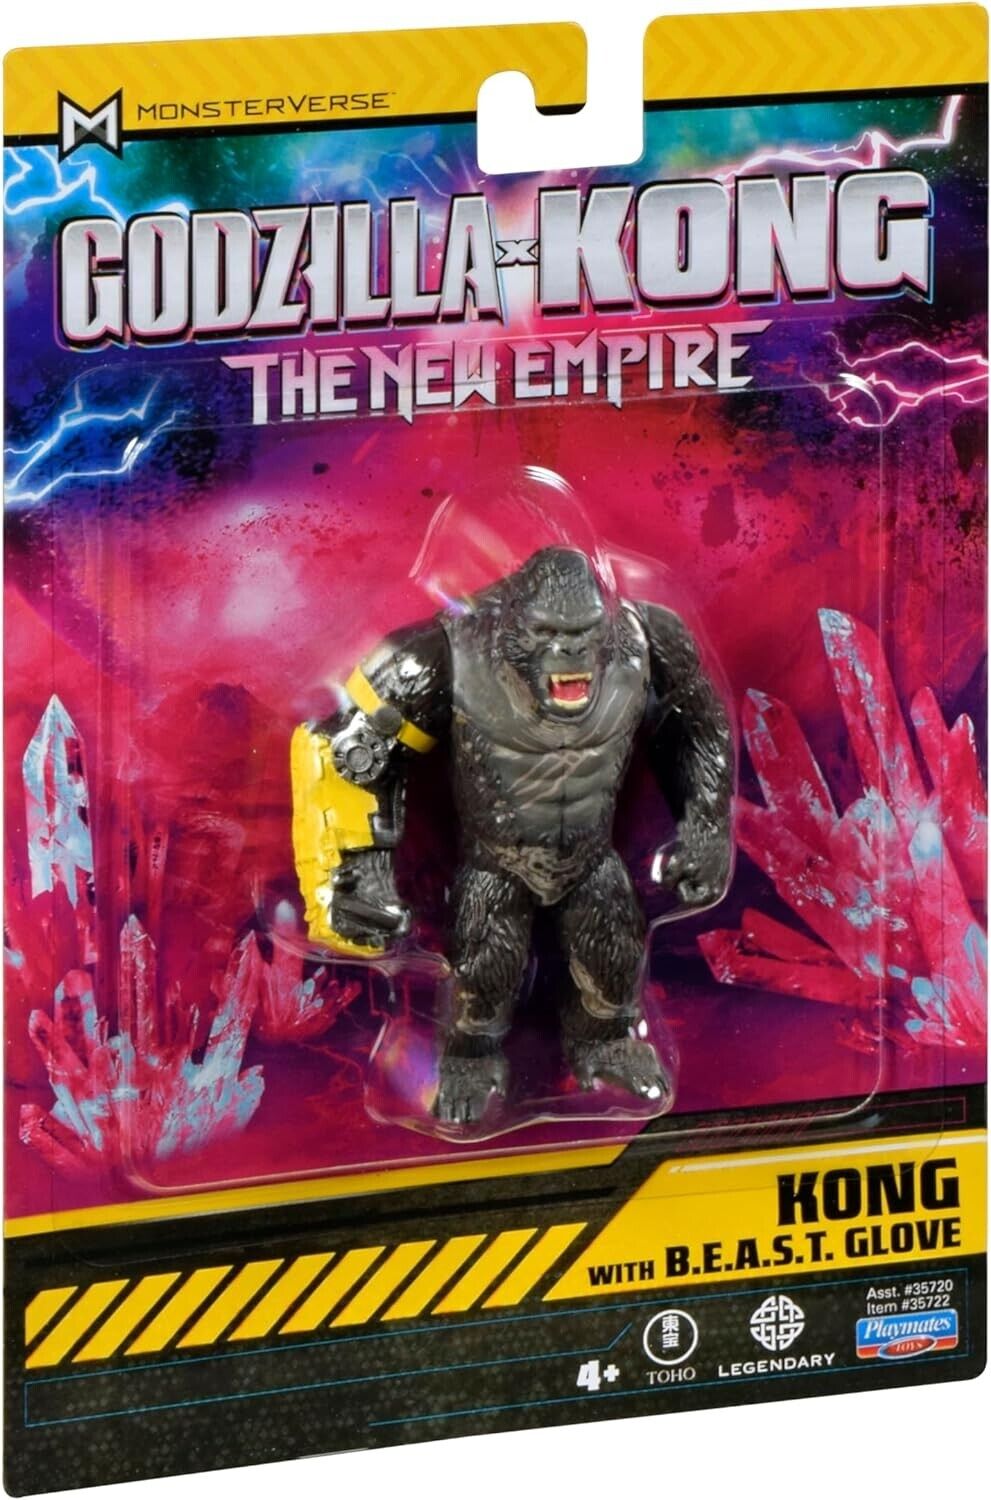 MonsterVerse Godzilla x Kong: The New Empire, 3.25-Inch Kong Action Figure Toy,